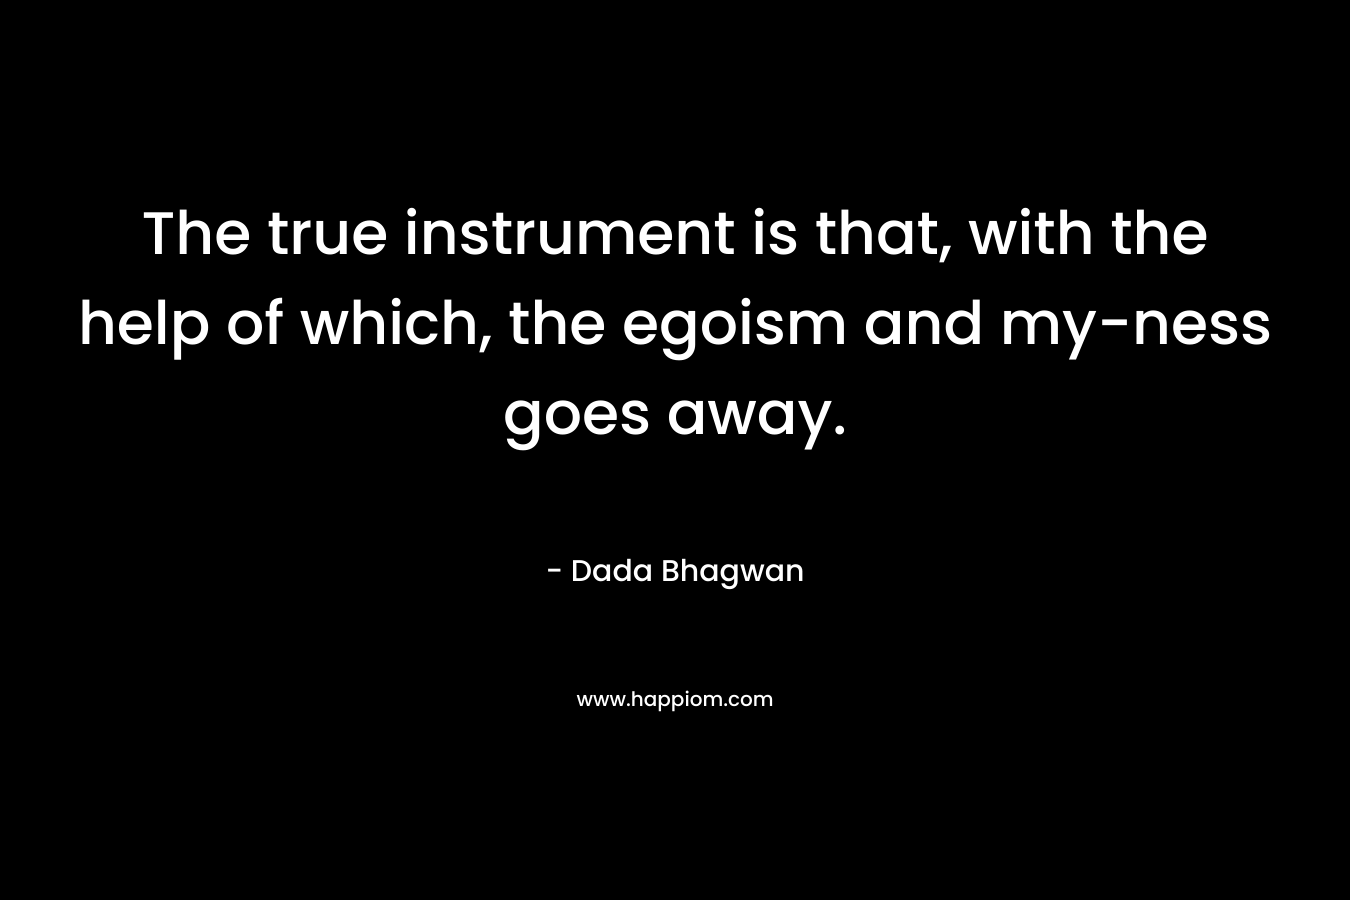 The true instrument is that, with the help of which, the egoism and my-ness goes away. – Dada Bhagwan